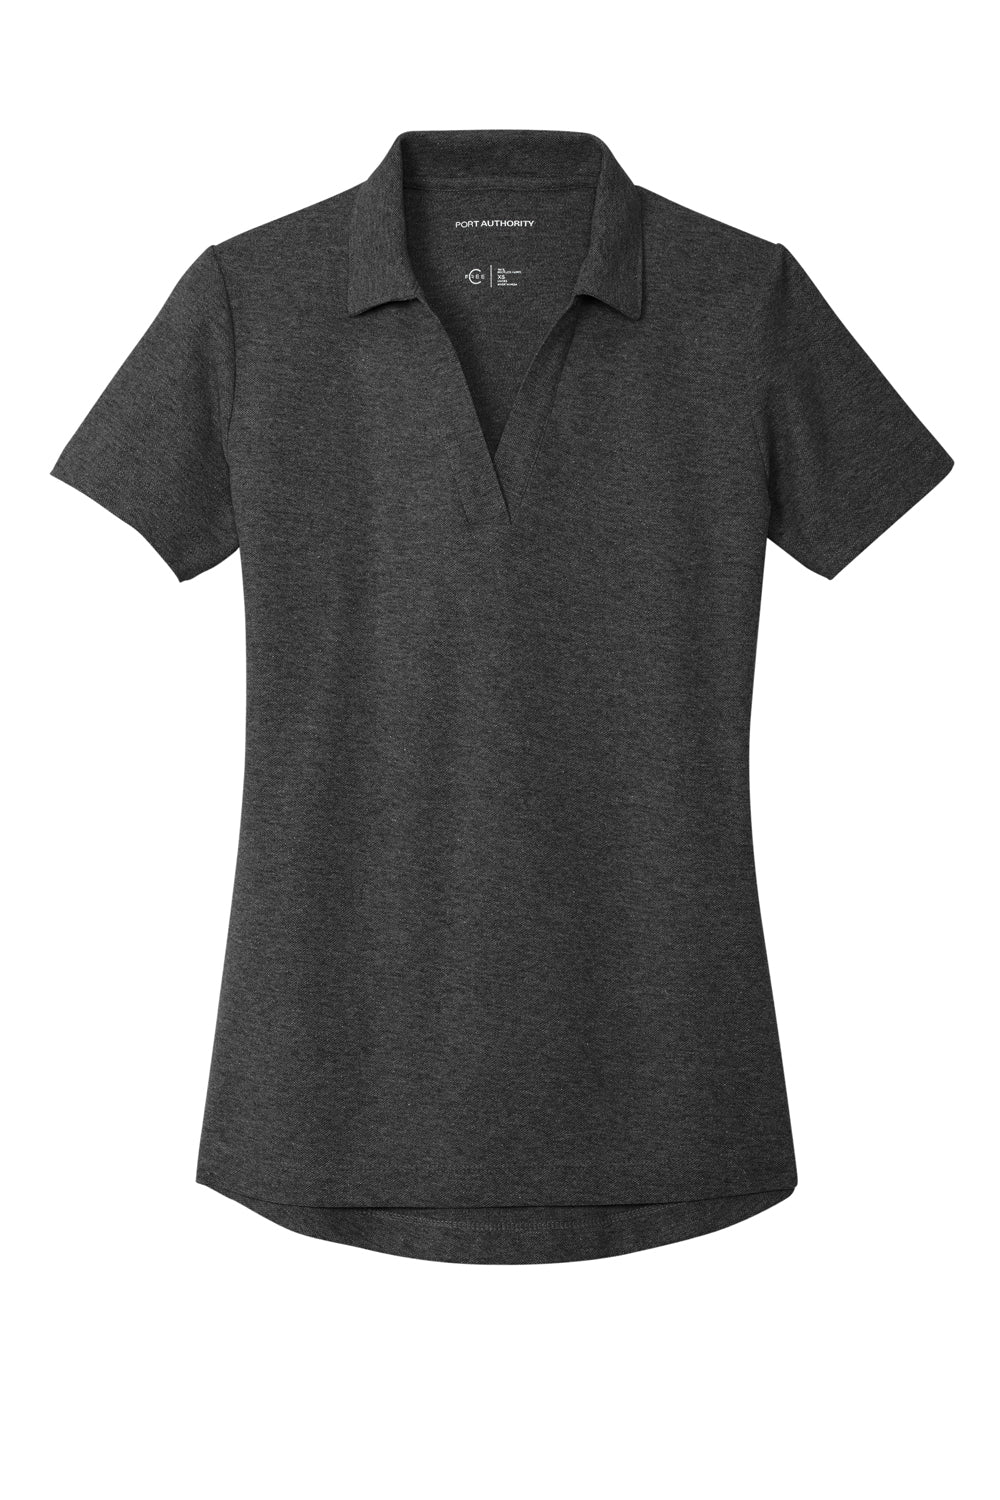 Port Authority LK867 Womens C-FREE Pique Short Sleeve Polo Shirt Heather Charcoal Grey Flat Front